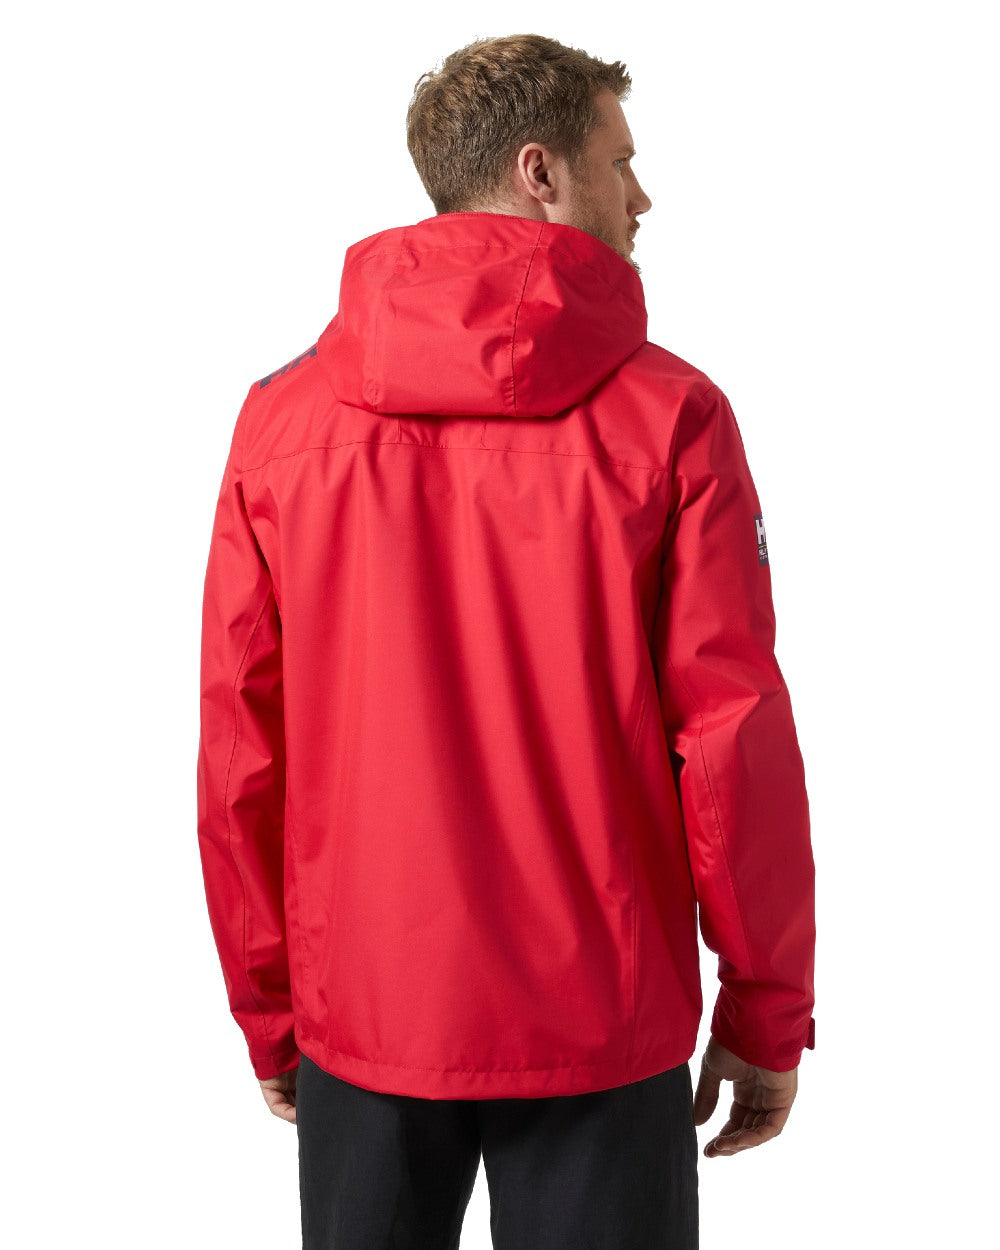 Red coloured Helly Hansen Mens Crew Hooded Jacket 2.0 on white background 